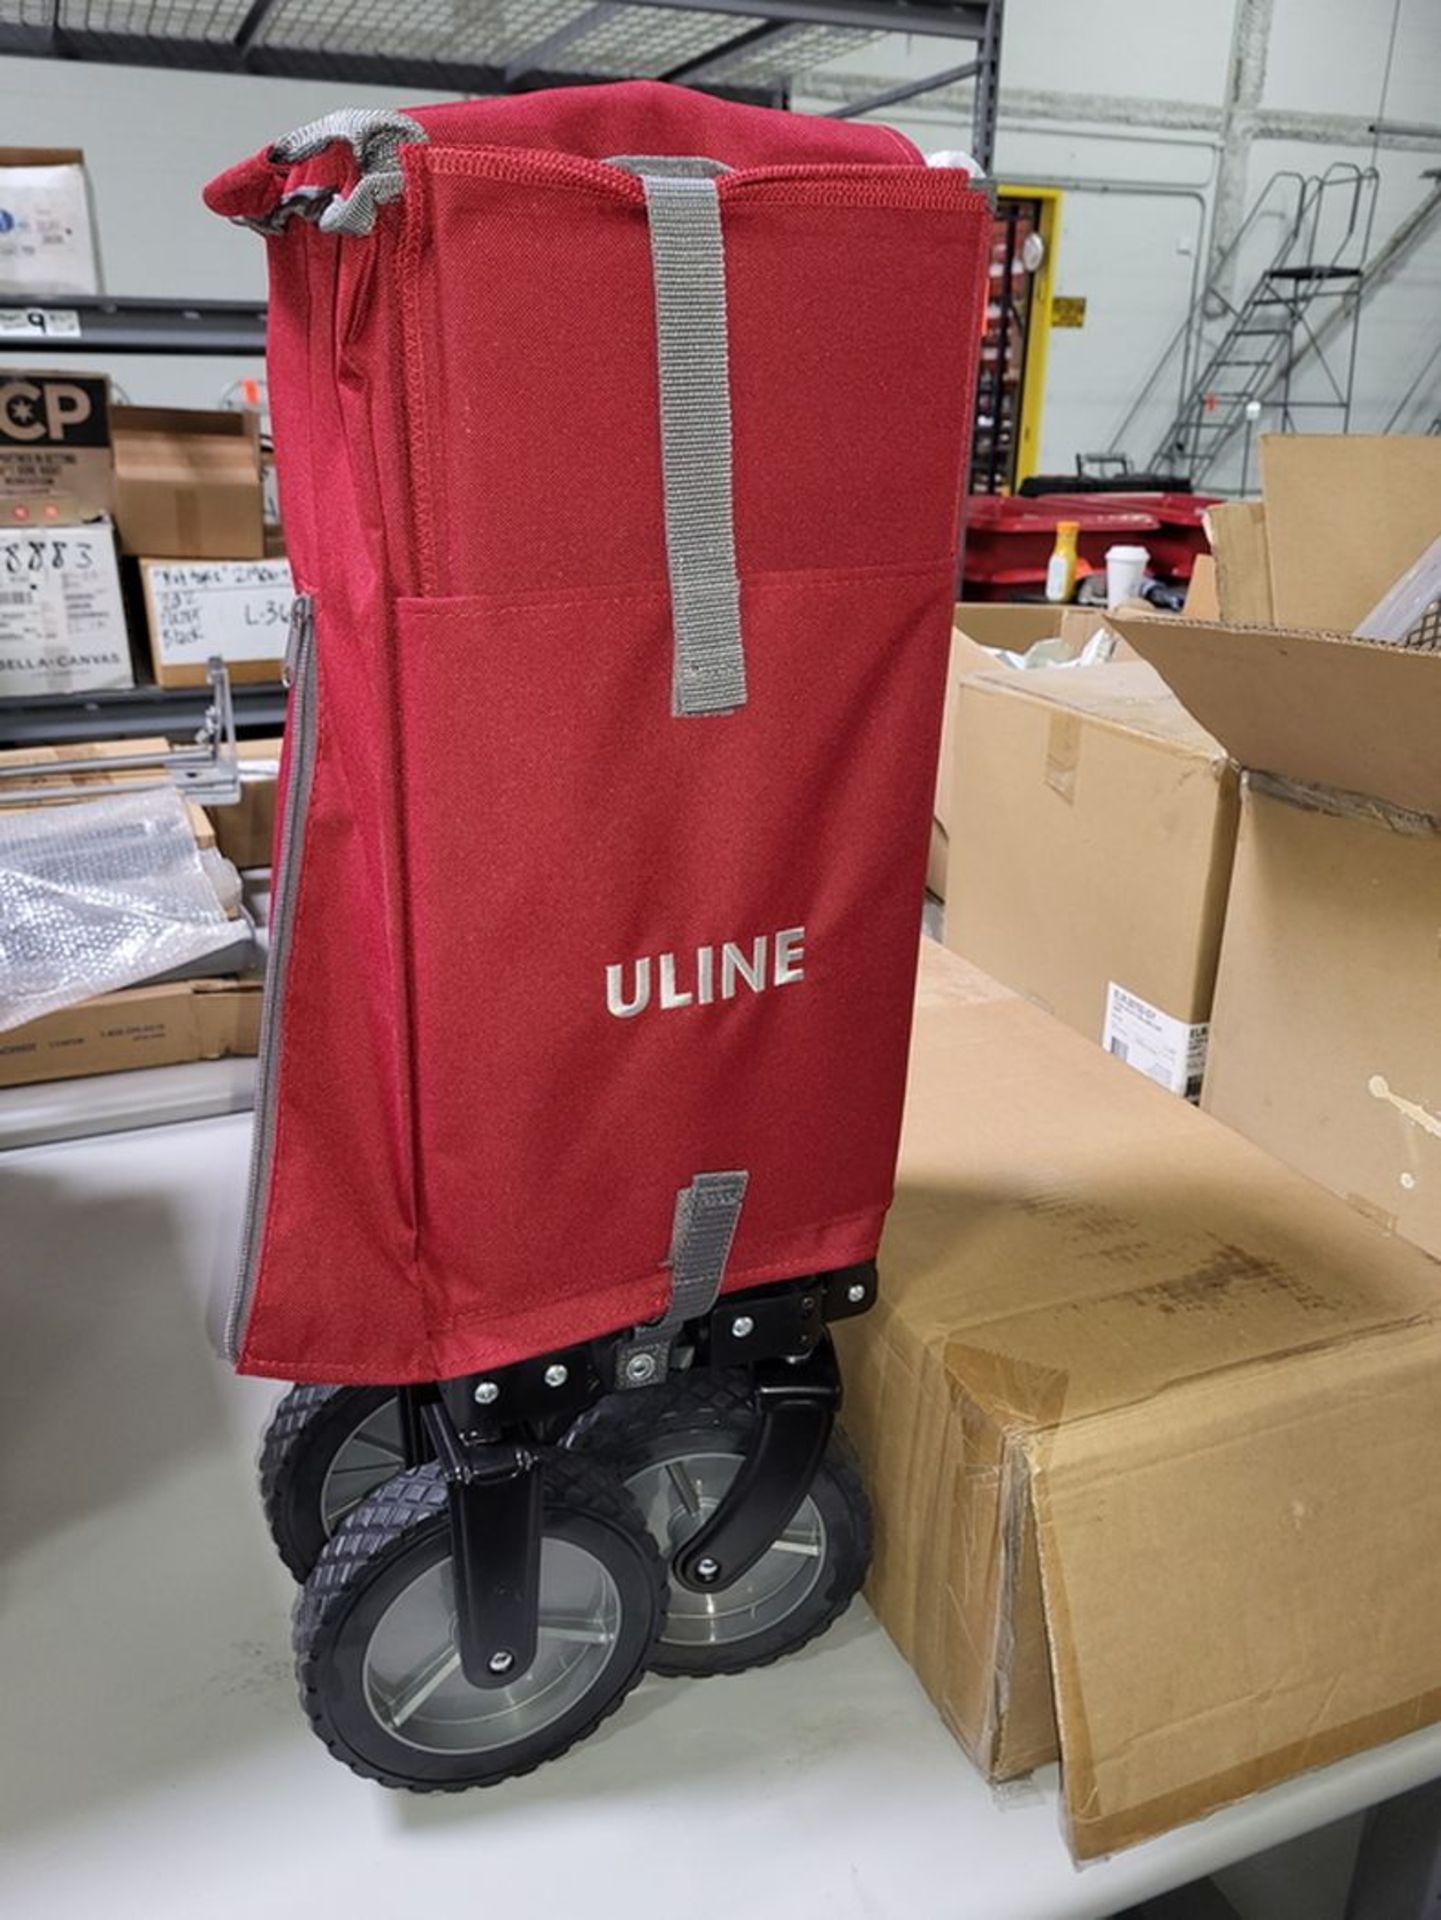 Uline Collapsible Cloth Basket Cart; Adjustable Height Handle (Unused in Box) - Image 2 of 3